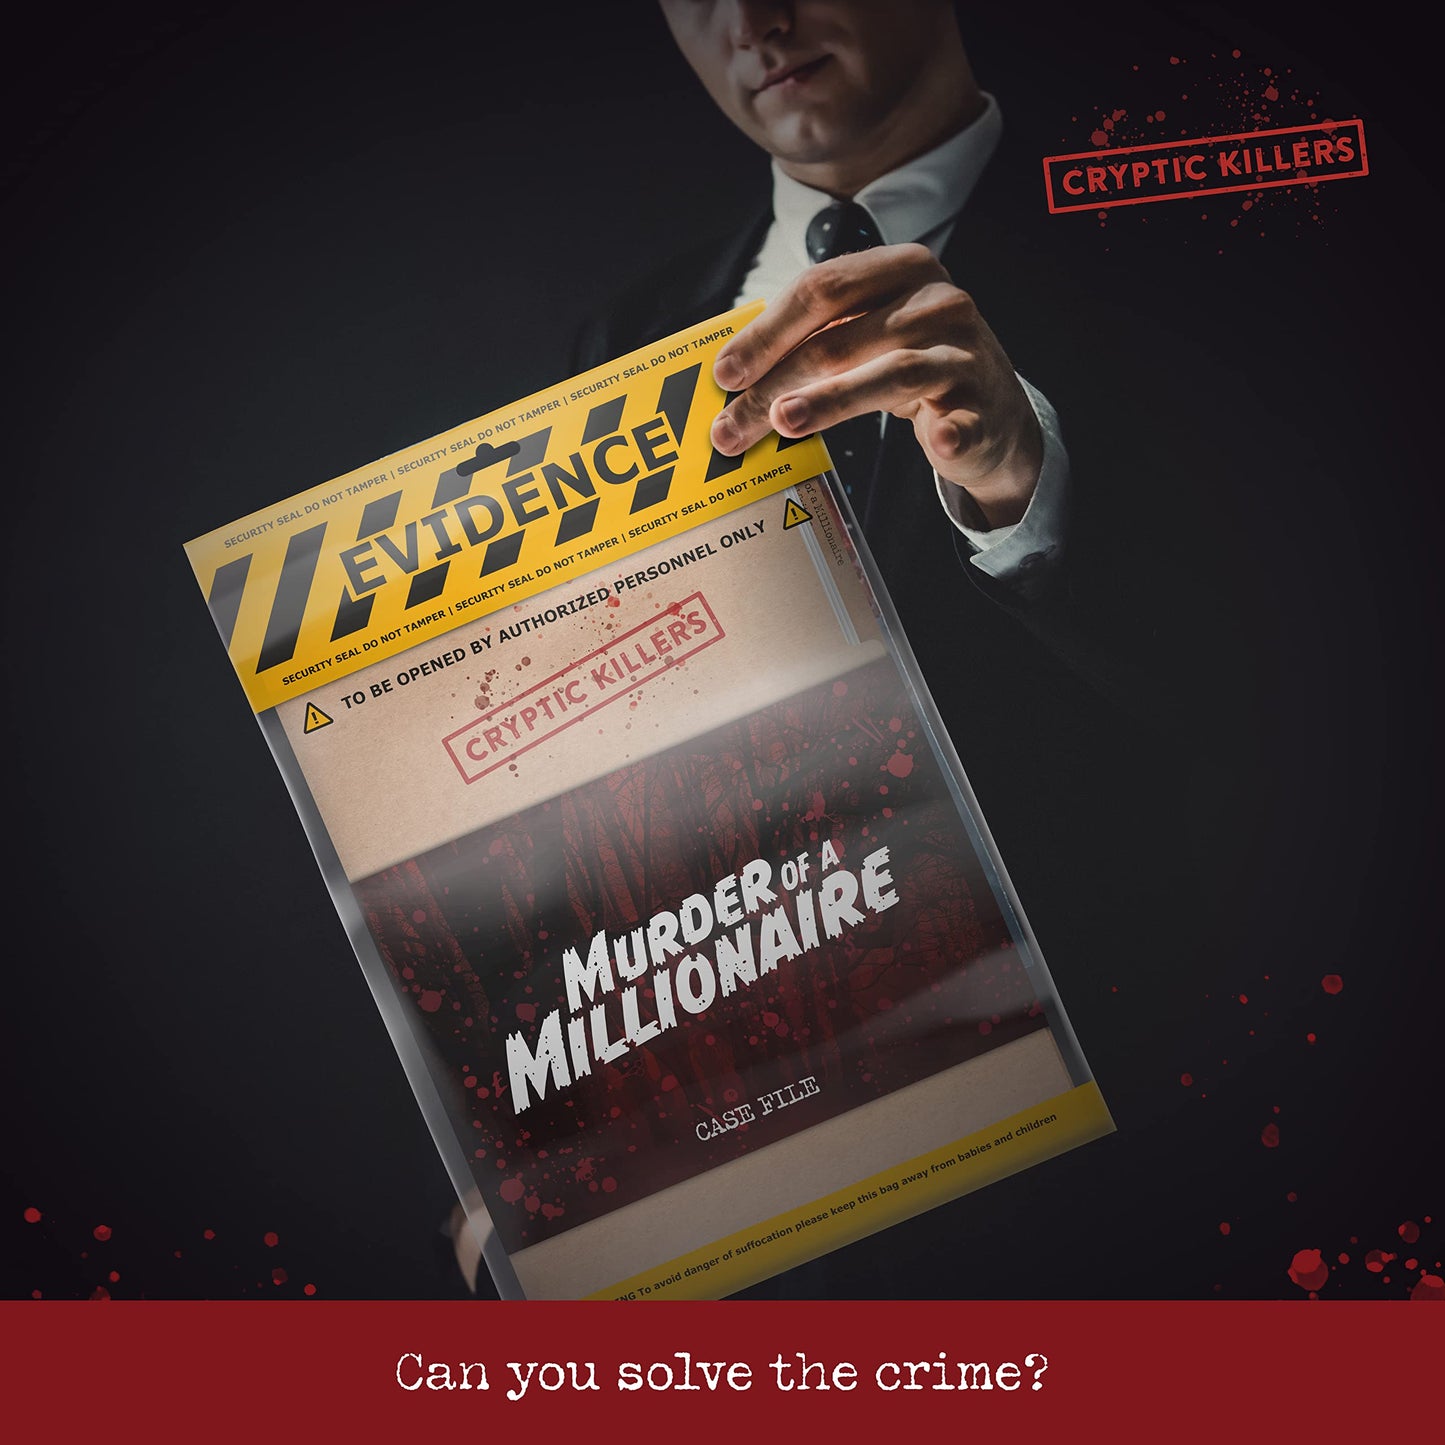 Cryptic Killers Unsolved Murder Mystery Game - Cold Case File Investigation - Detective Clues/Evidence - Solve The Crime - for Individuals, Date Nights & Party Groups - Murder of a Millionaire